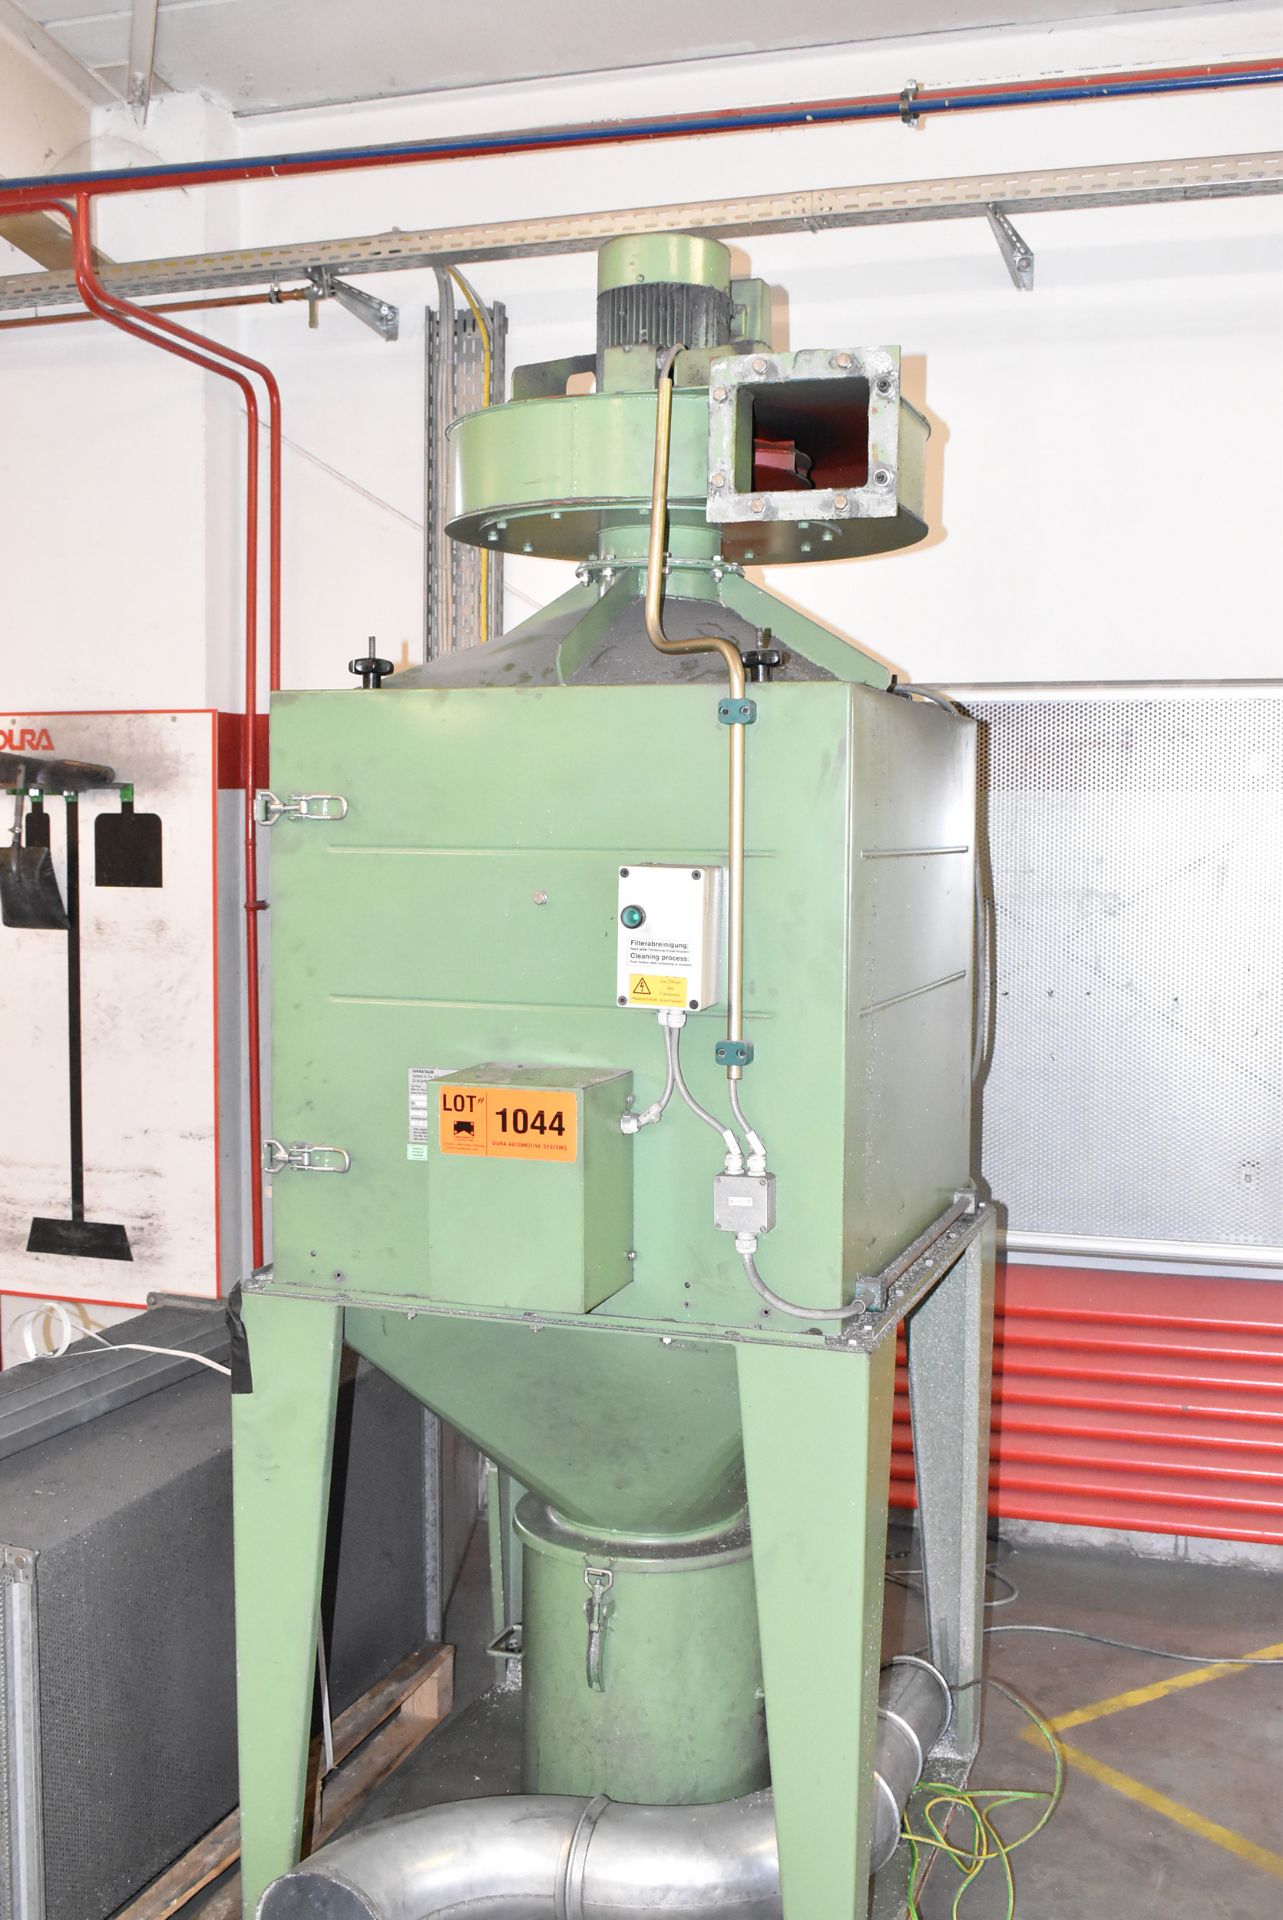 INFASTAUB AM173 DUST COLLECTOR, S/N 4177 (SEL) [Removal Fee = € 82.50 + applicable VAT - Gerritsen